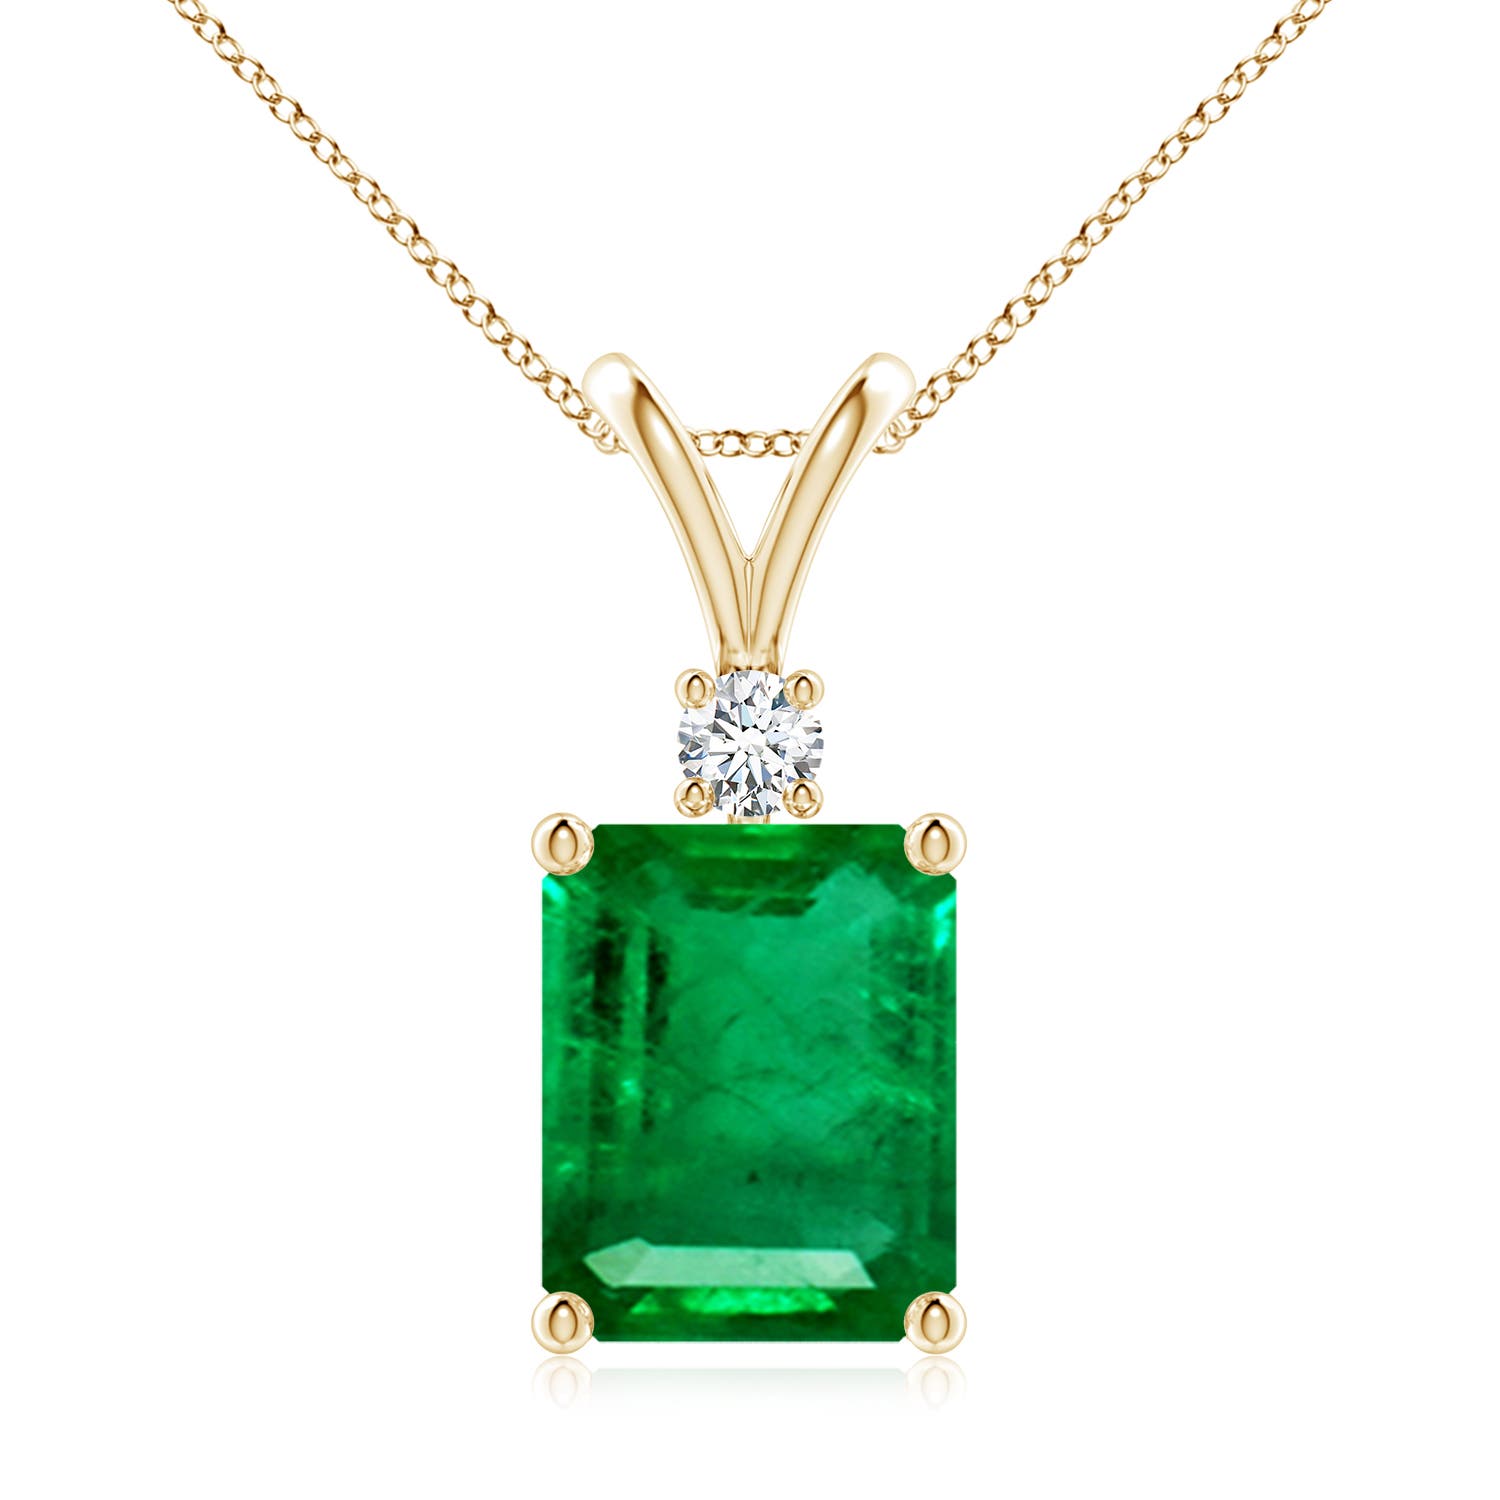 AAA - Emerald / 2.96 CT / 14 KT Yellow Gold